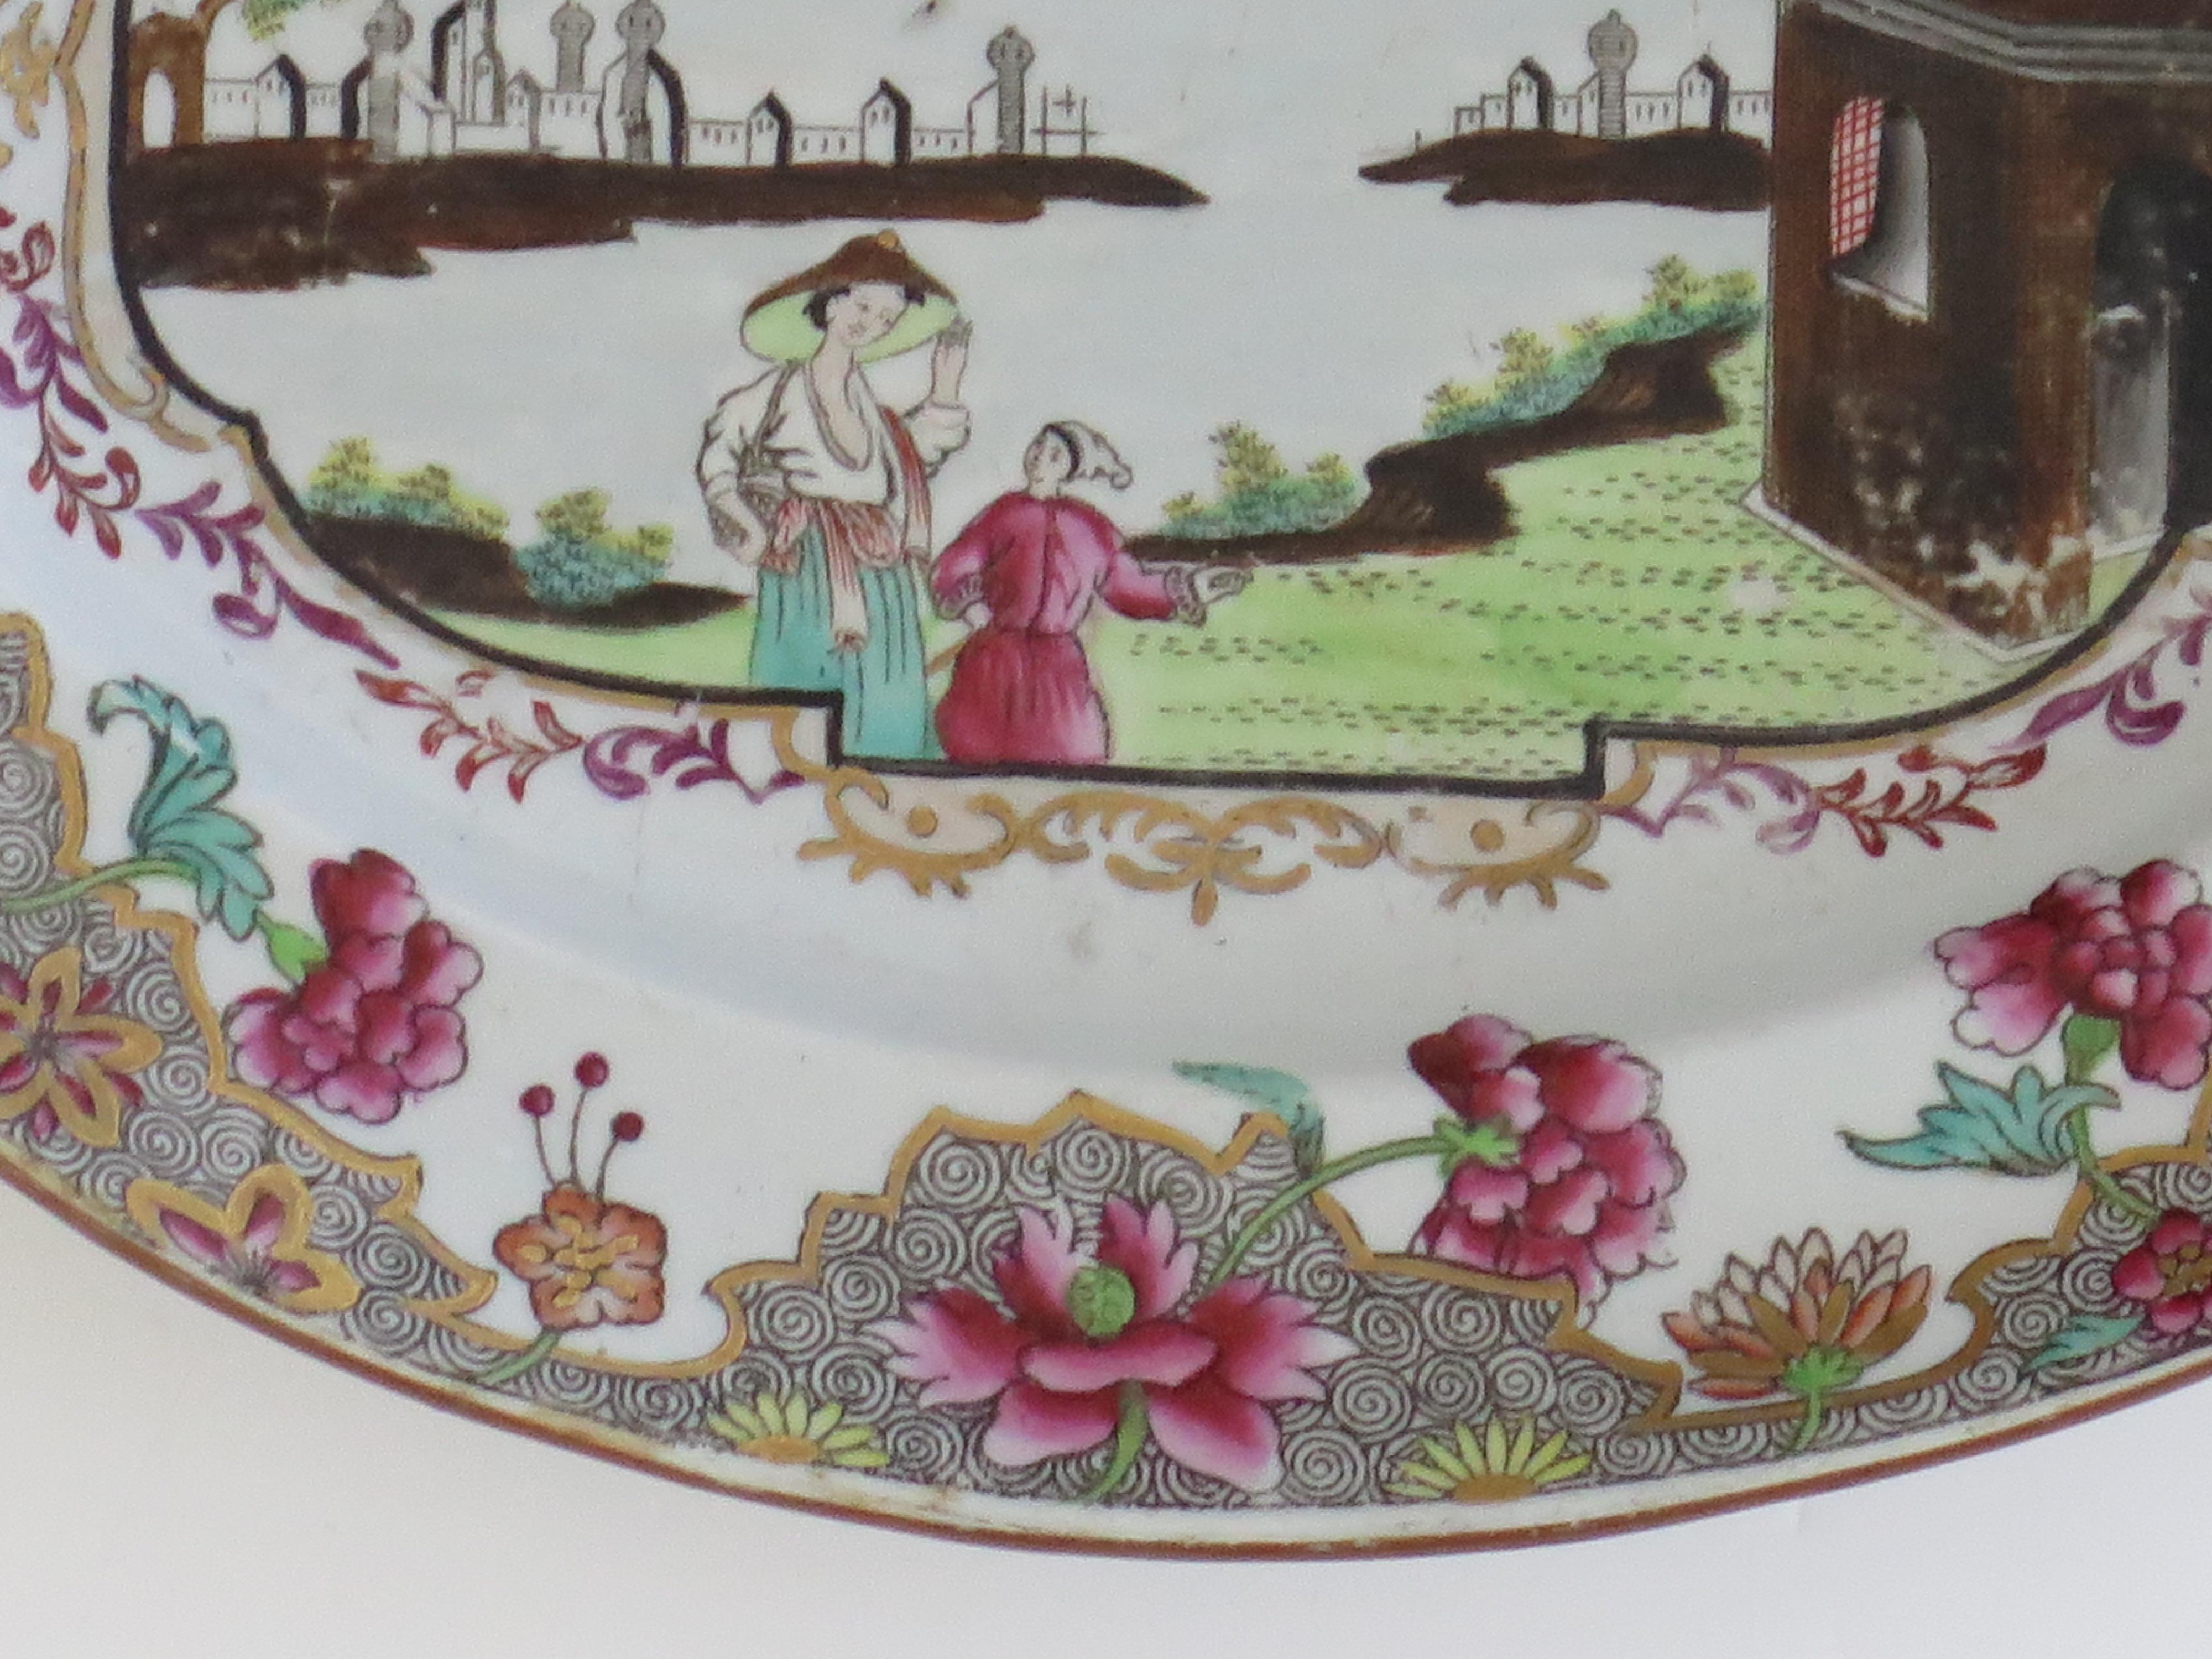 English Spode Stone China Small Serving Dish in Ship Pattern 3068, circa 1810 For Sale